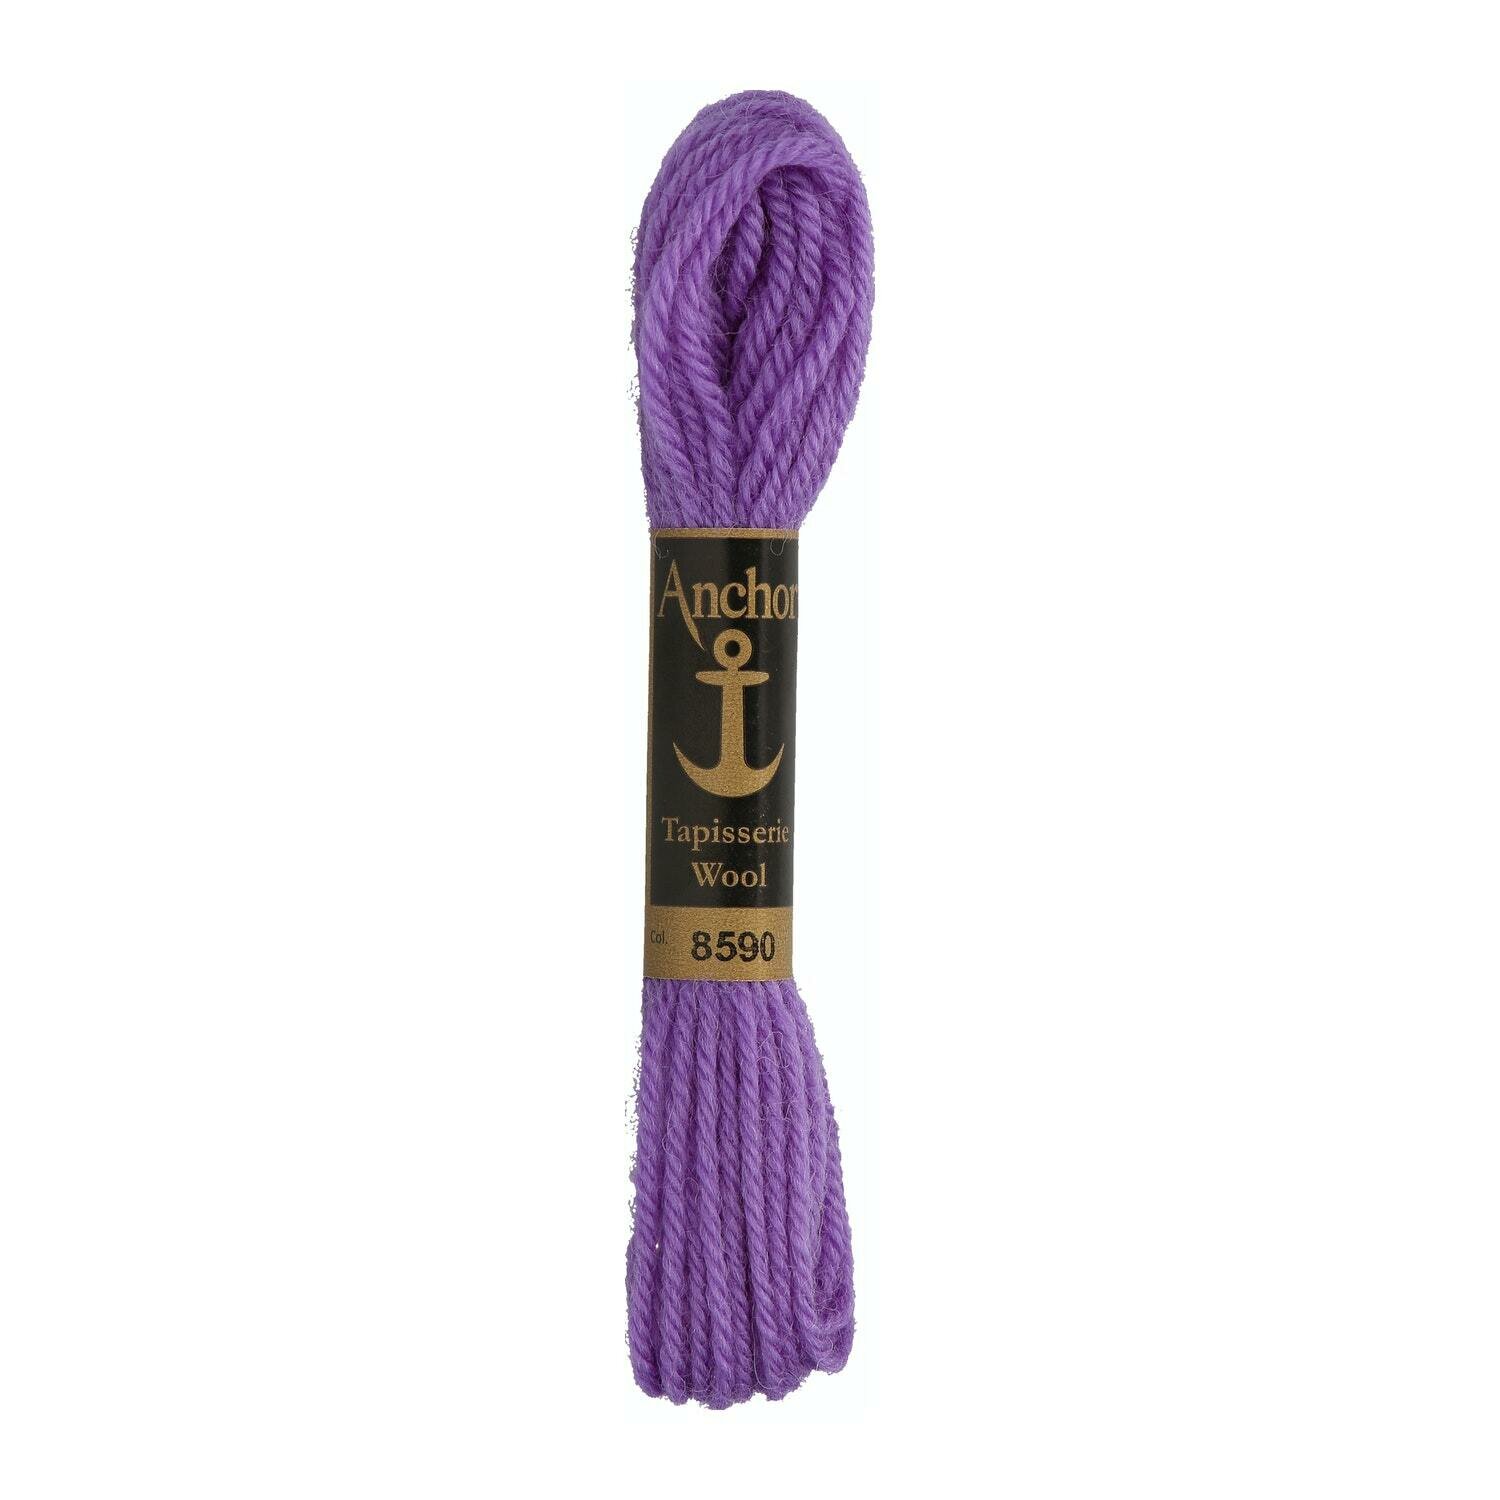 Anchor Tapisserie Wool #  08590